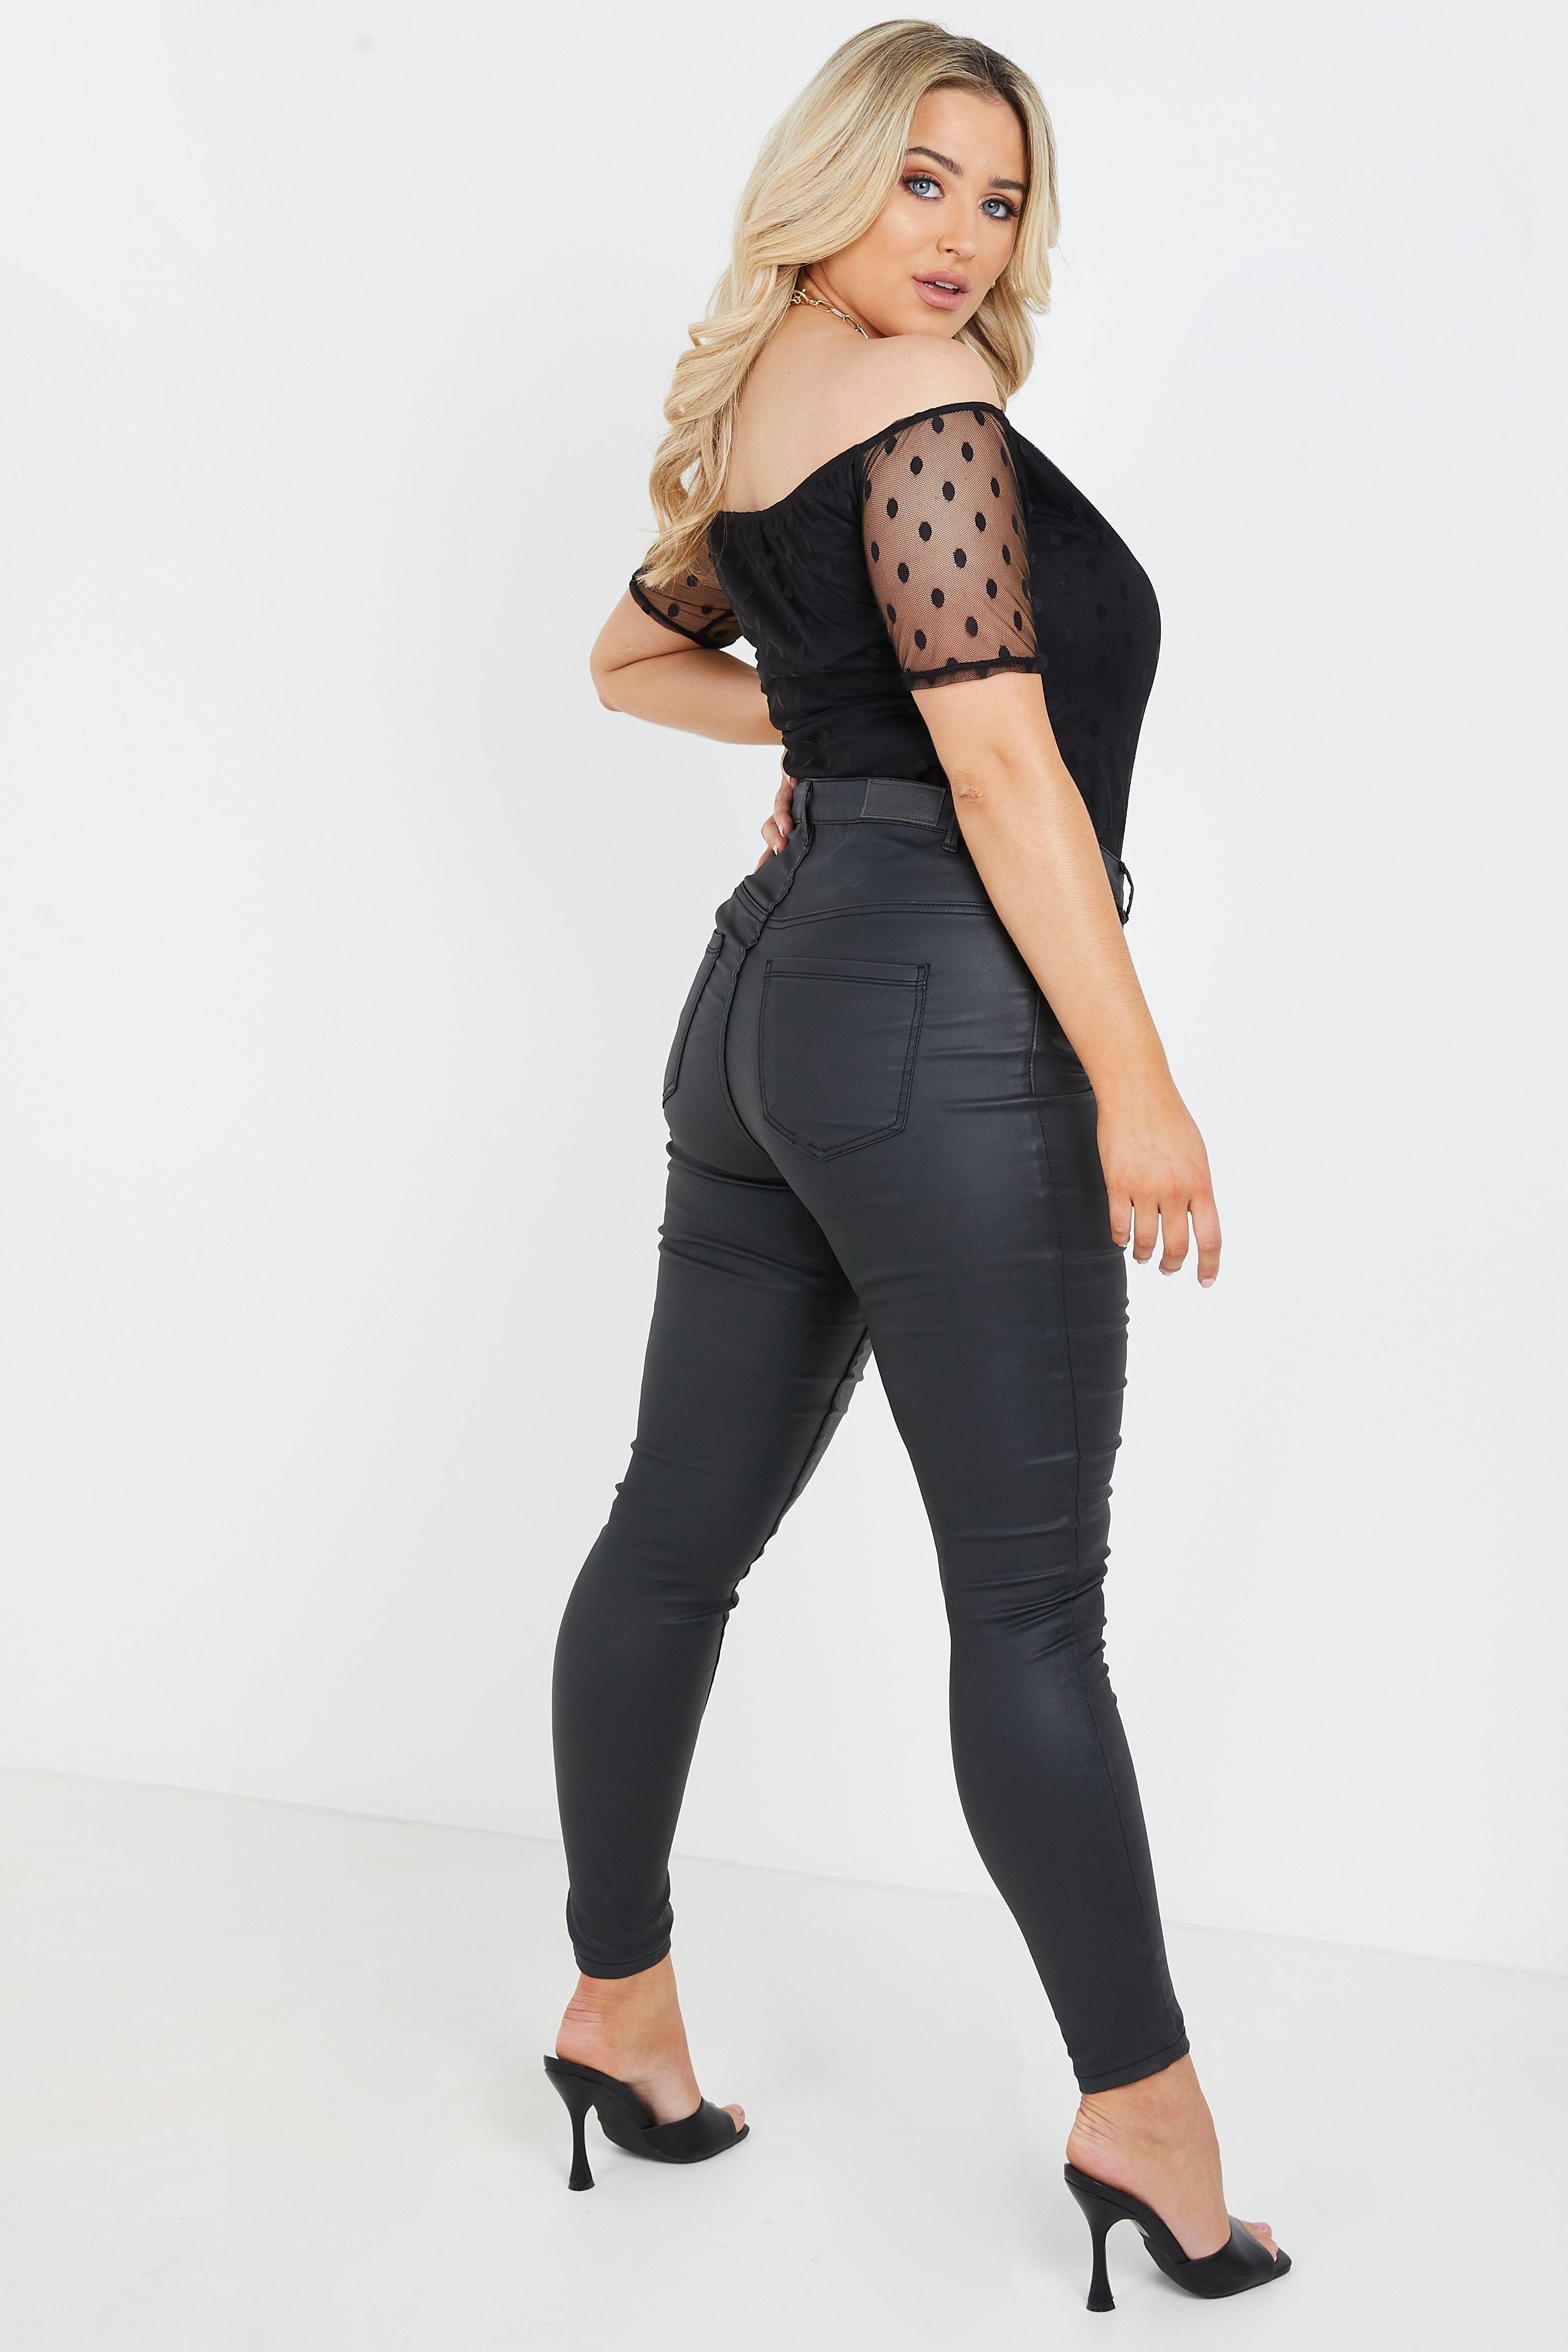 - Curve collection  - Polka dot   - Bardot style   - Mesh style   - Bodysuit  - Length: 70cm approx  - Model Height: 5' 10